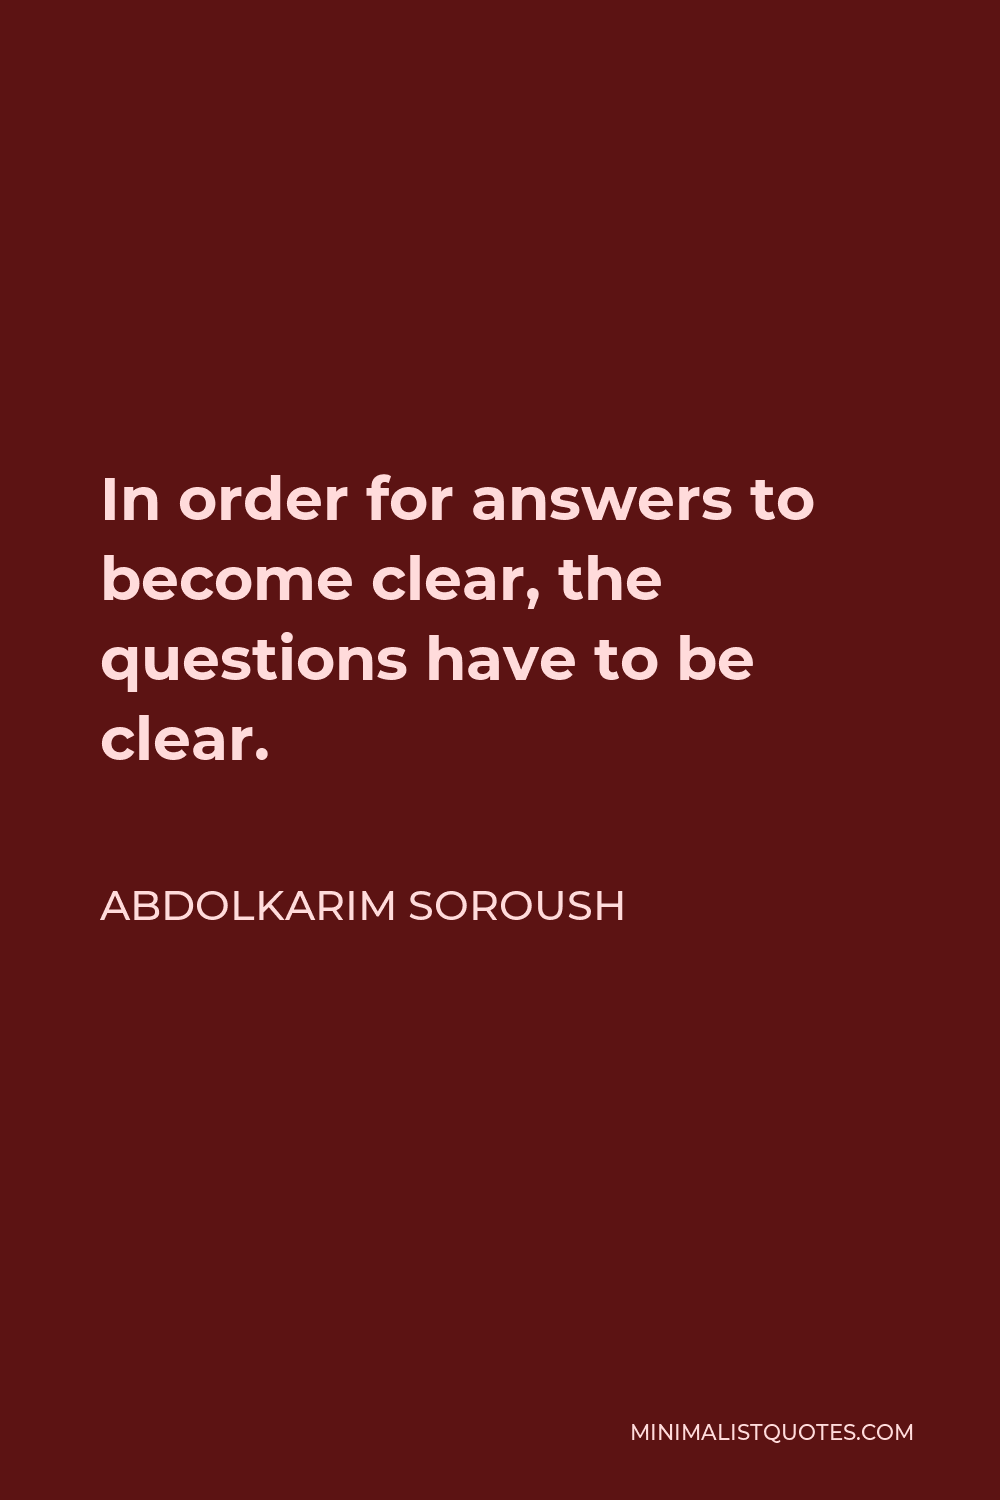 Abdolkarim Soroush Quote - In order for answers to become clear, the questions have to be clear.